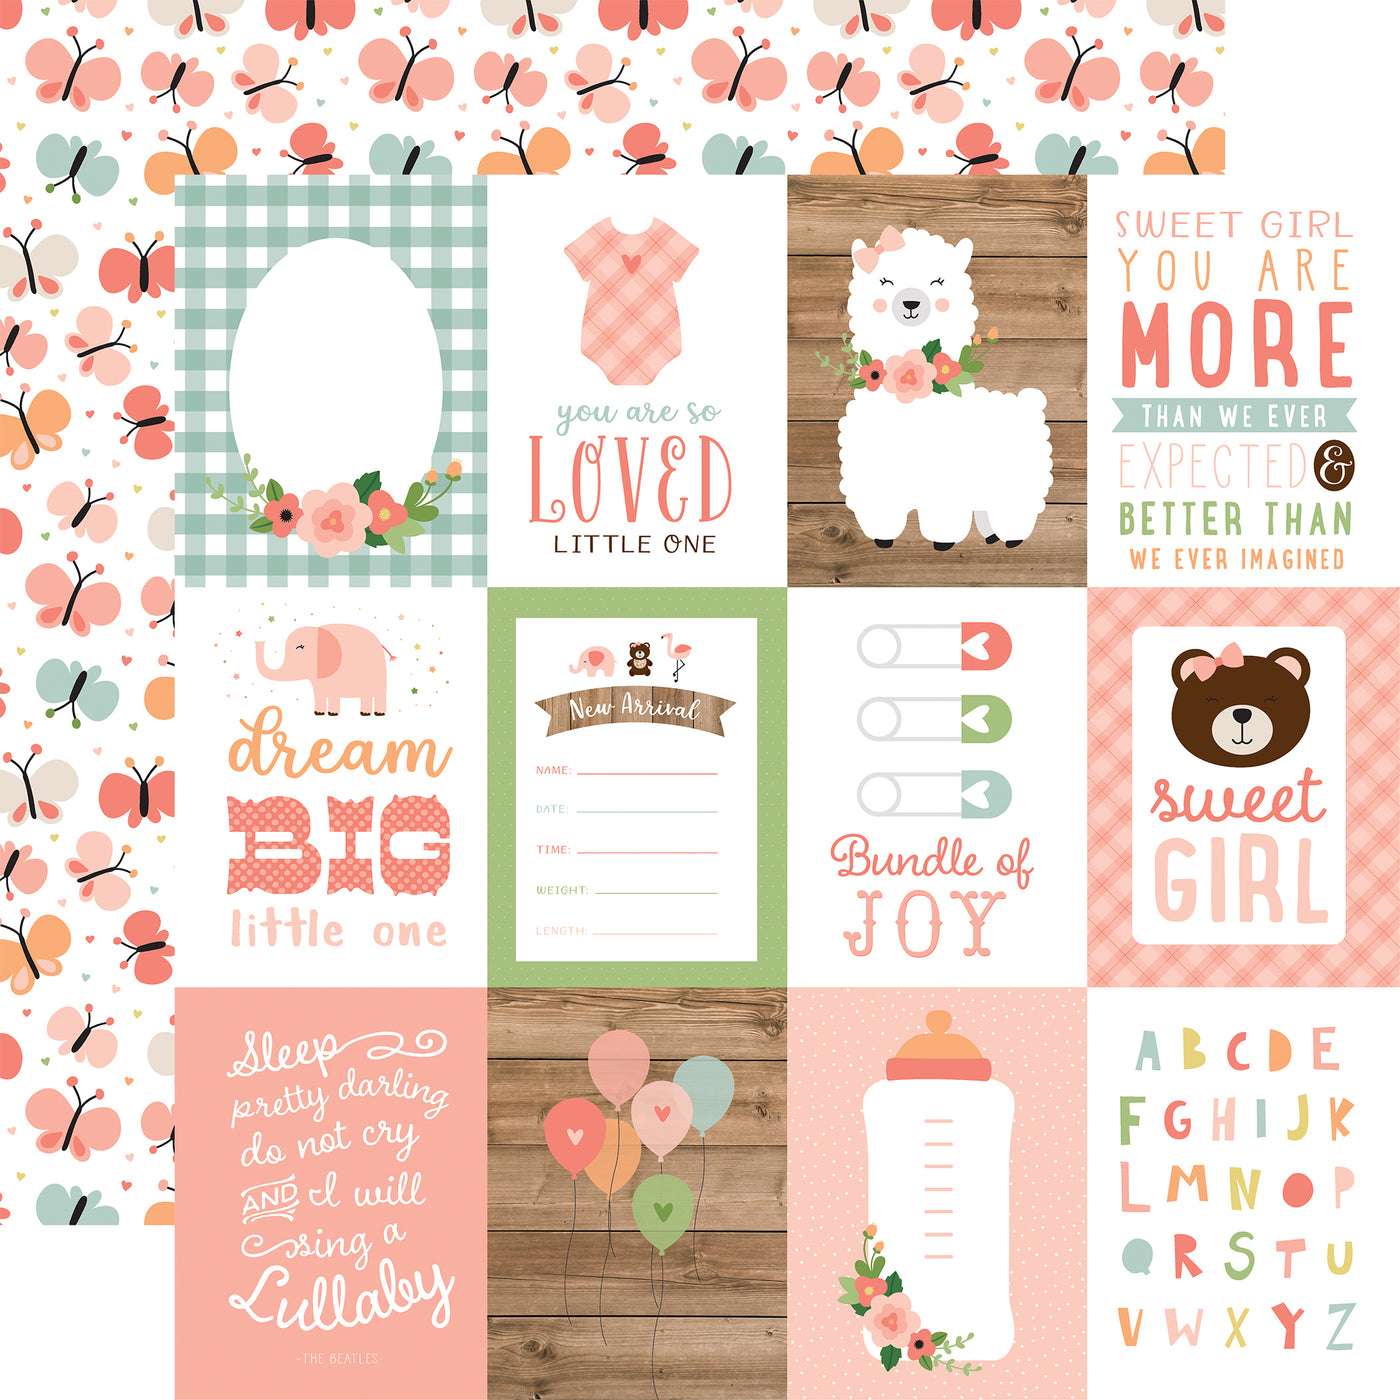 BABY GIRL 12x12 Collection Kit - Echo Park